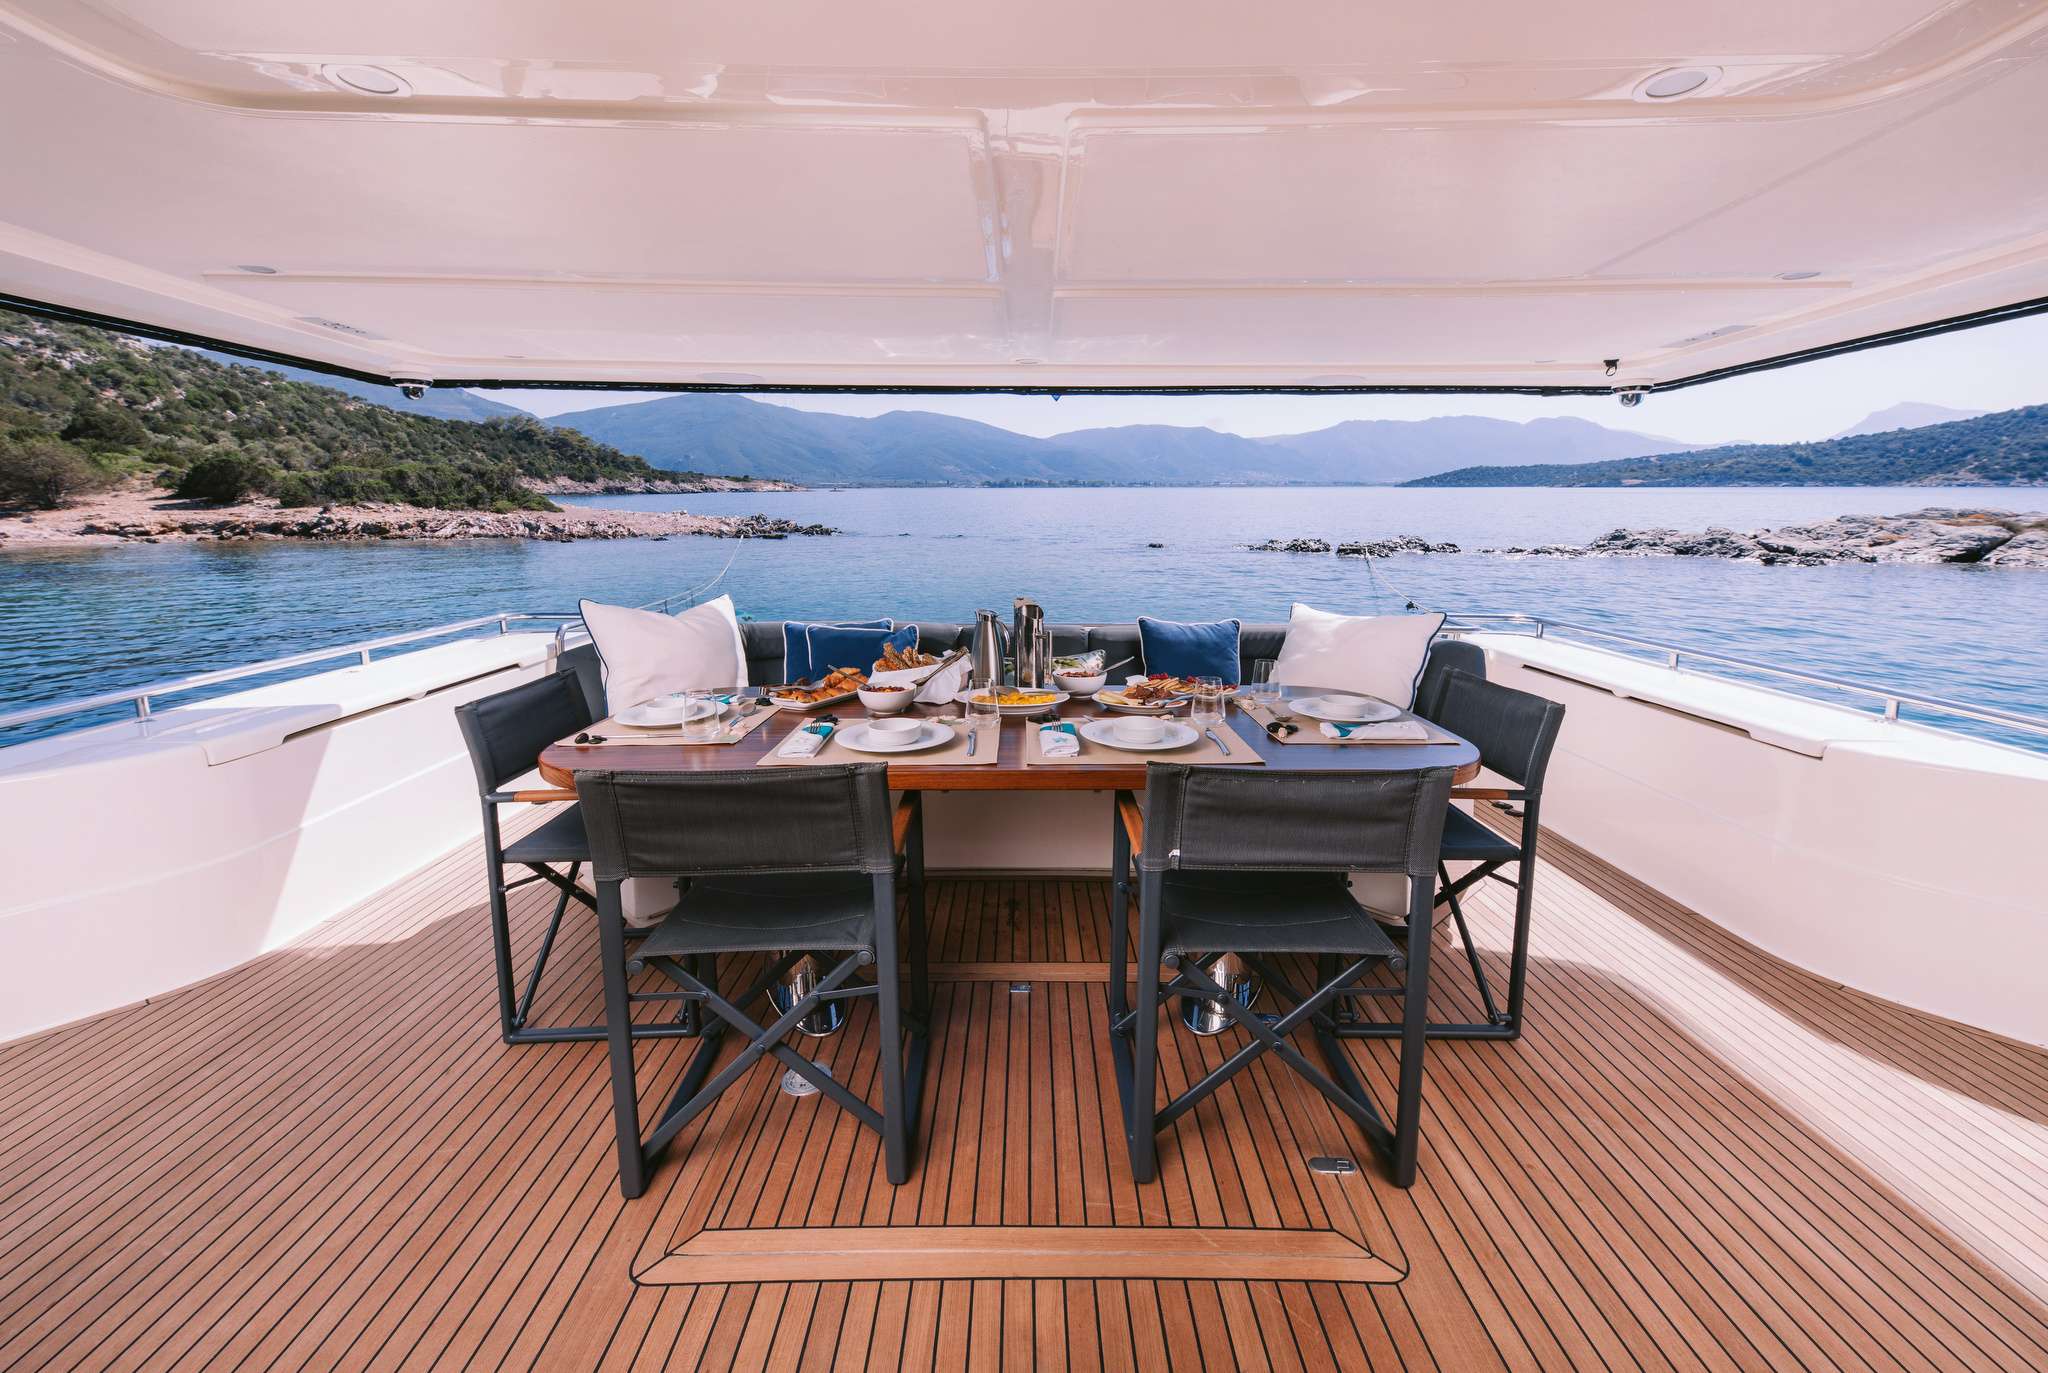 OXYGEN 8 Yacht Charter - Aft deck with alfresco dining